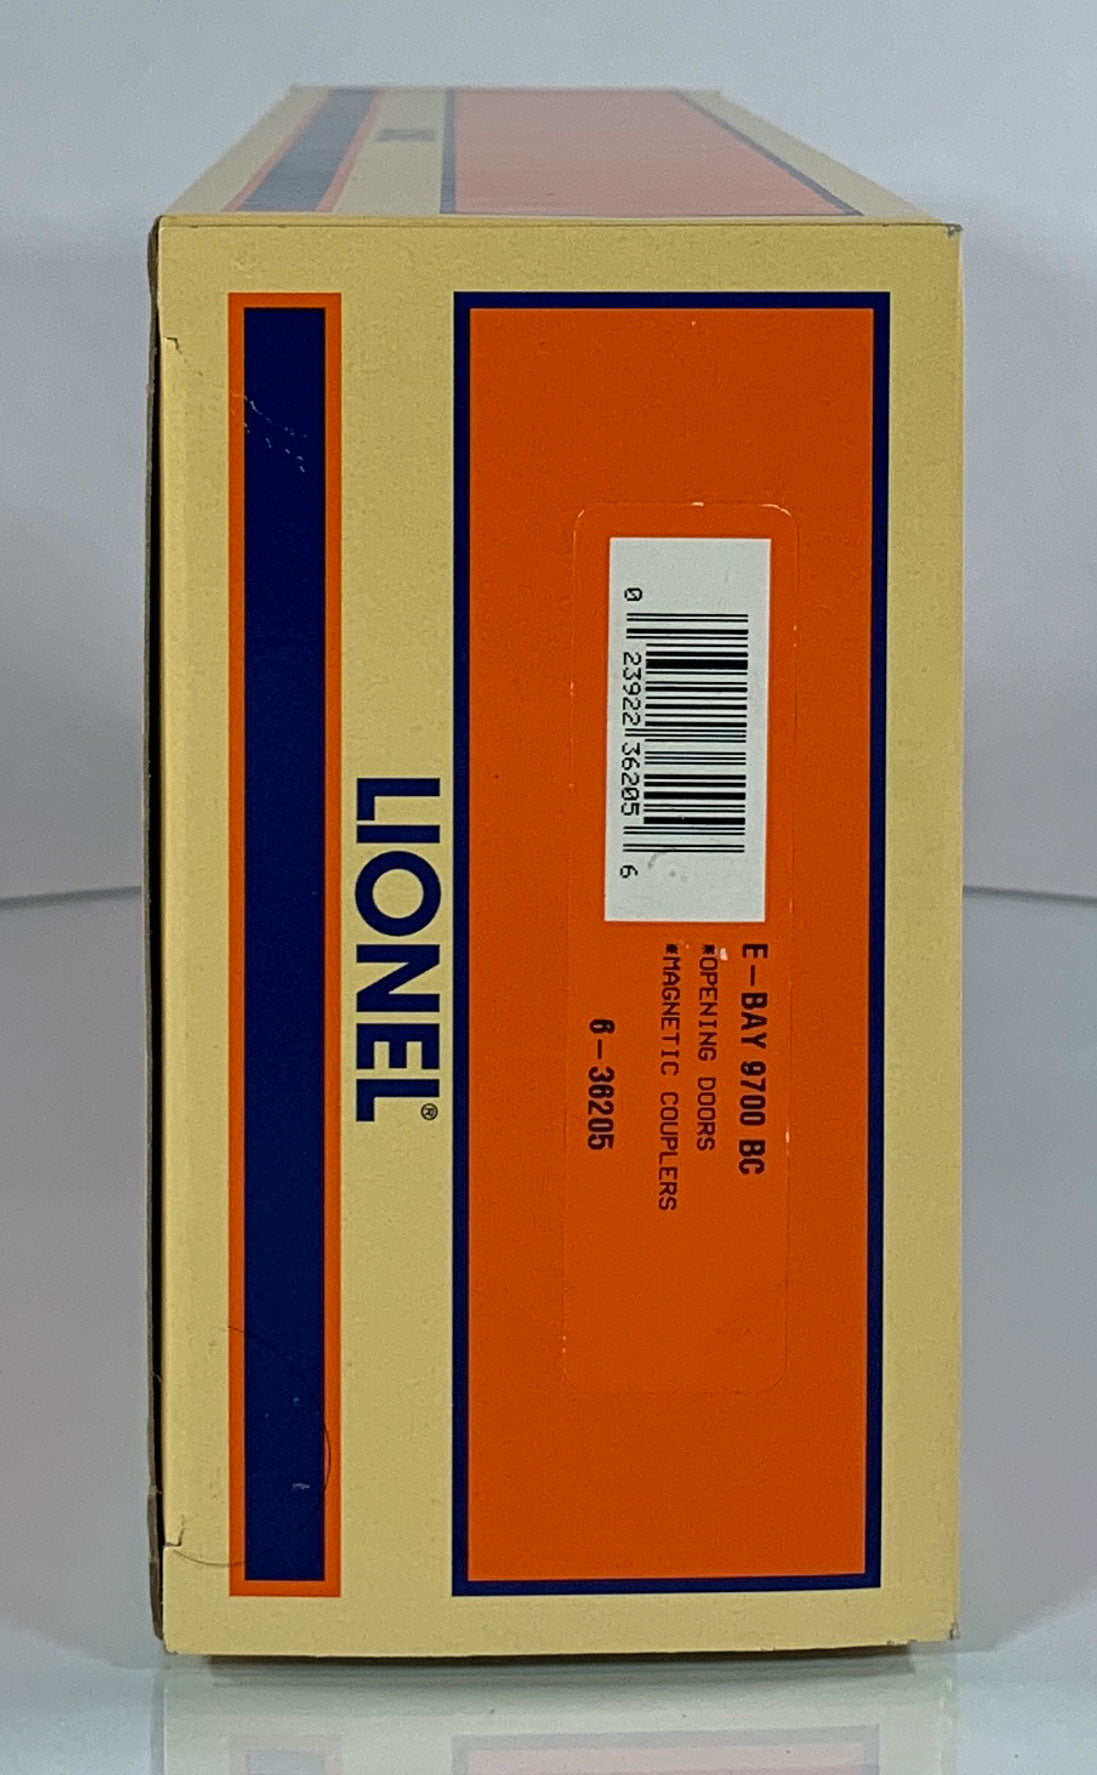 LIONEL • O GAUGE • 2000 Ebay Limited Edition #346 of 500 Boxcar 6-36205 • NEW OLD STOCK